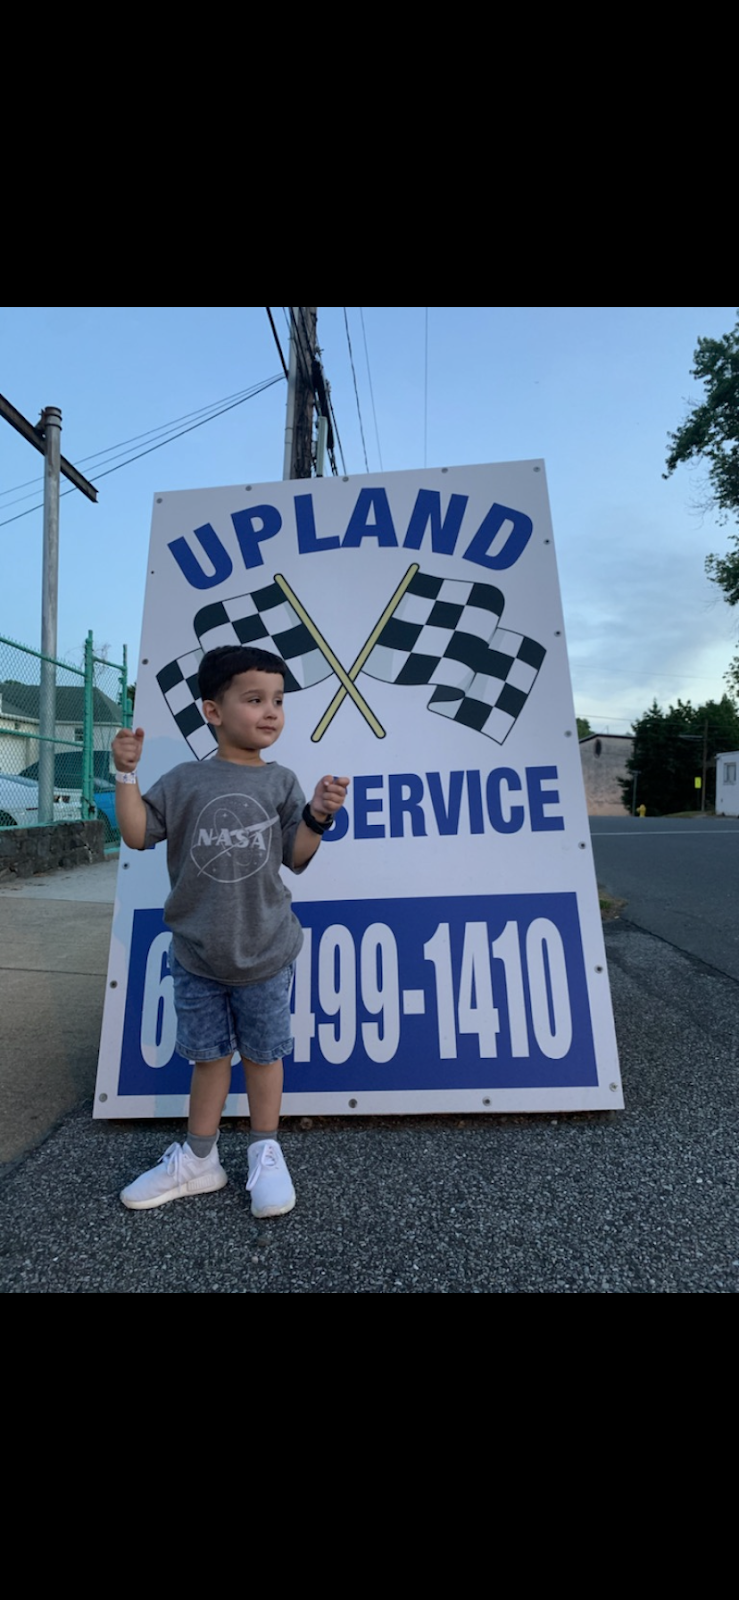 Upland Auto Services | 501 Upland Ave, Brookhaven, PA 19015 | Phone: (610) 499-1410